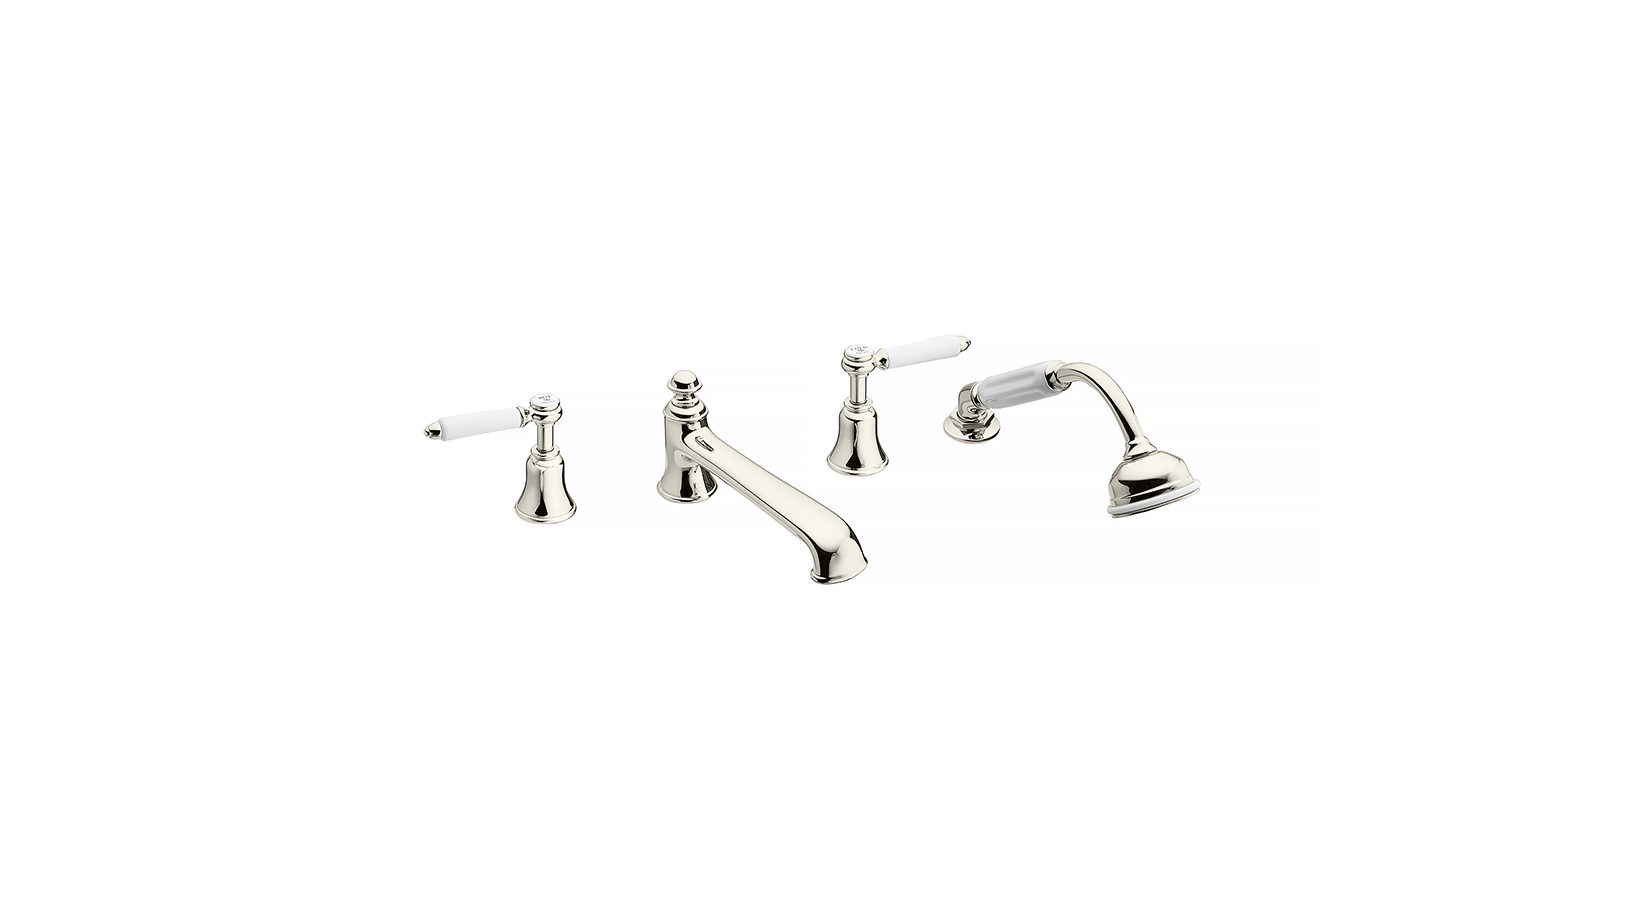 The Coll Lever 4-Hole Bath & Shower Mixer